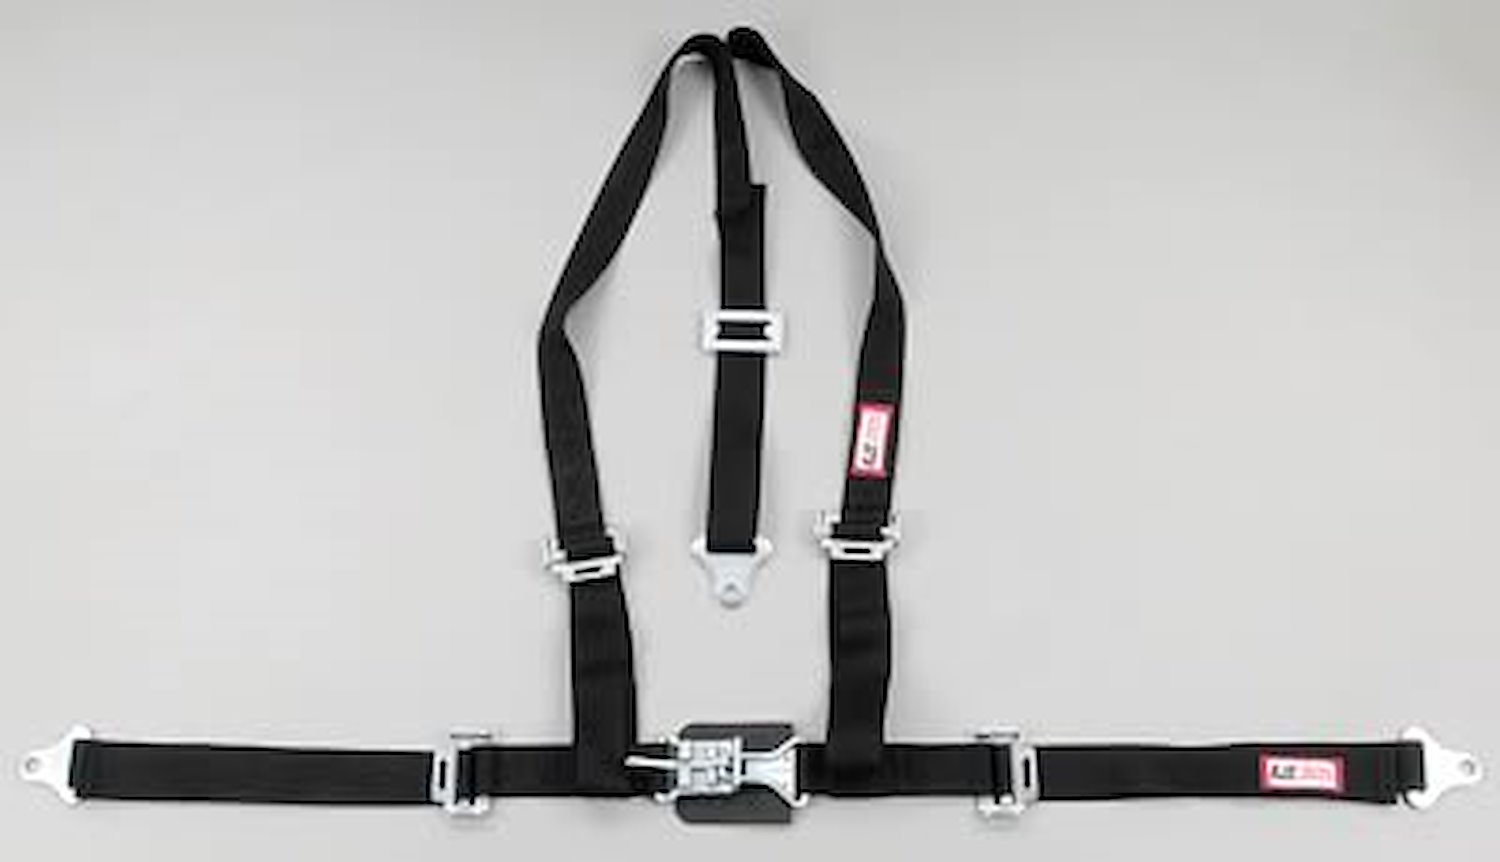 NON-SFI L&L HARNESS 2 PULL UP Lap Belt SNAP SEWN IN 2 S.H. Y FLOOR Mount WRAP/BOLT PURPLE